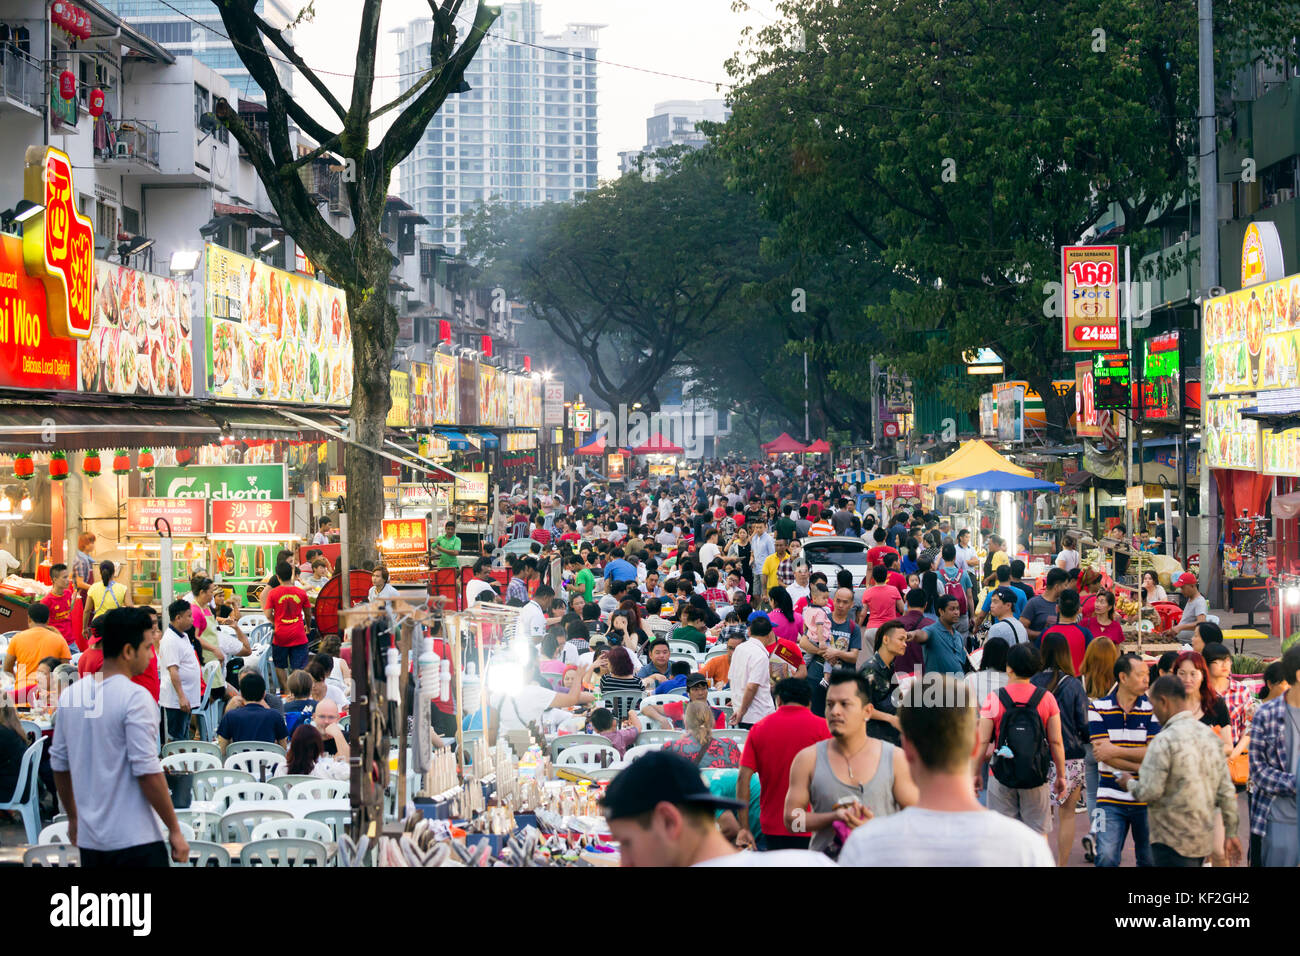 Jalan Alor located in Bukit Bintang is a well known and famous street food destination in Kuala Lumpur, Malaysia. Stock Photo